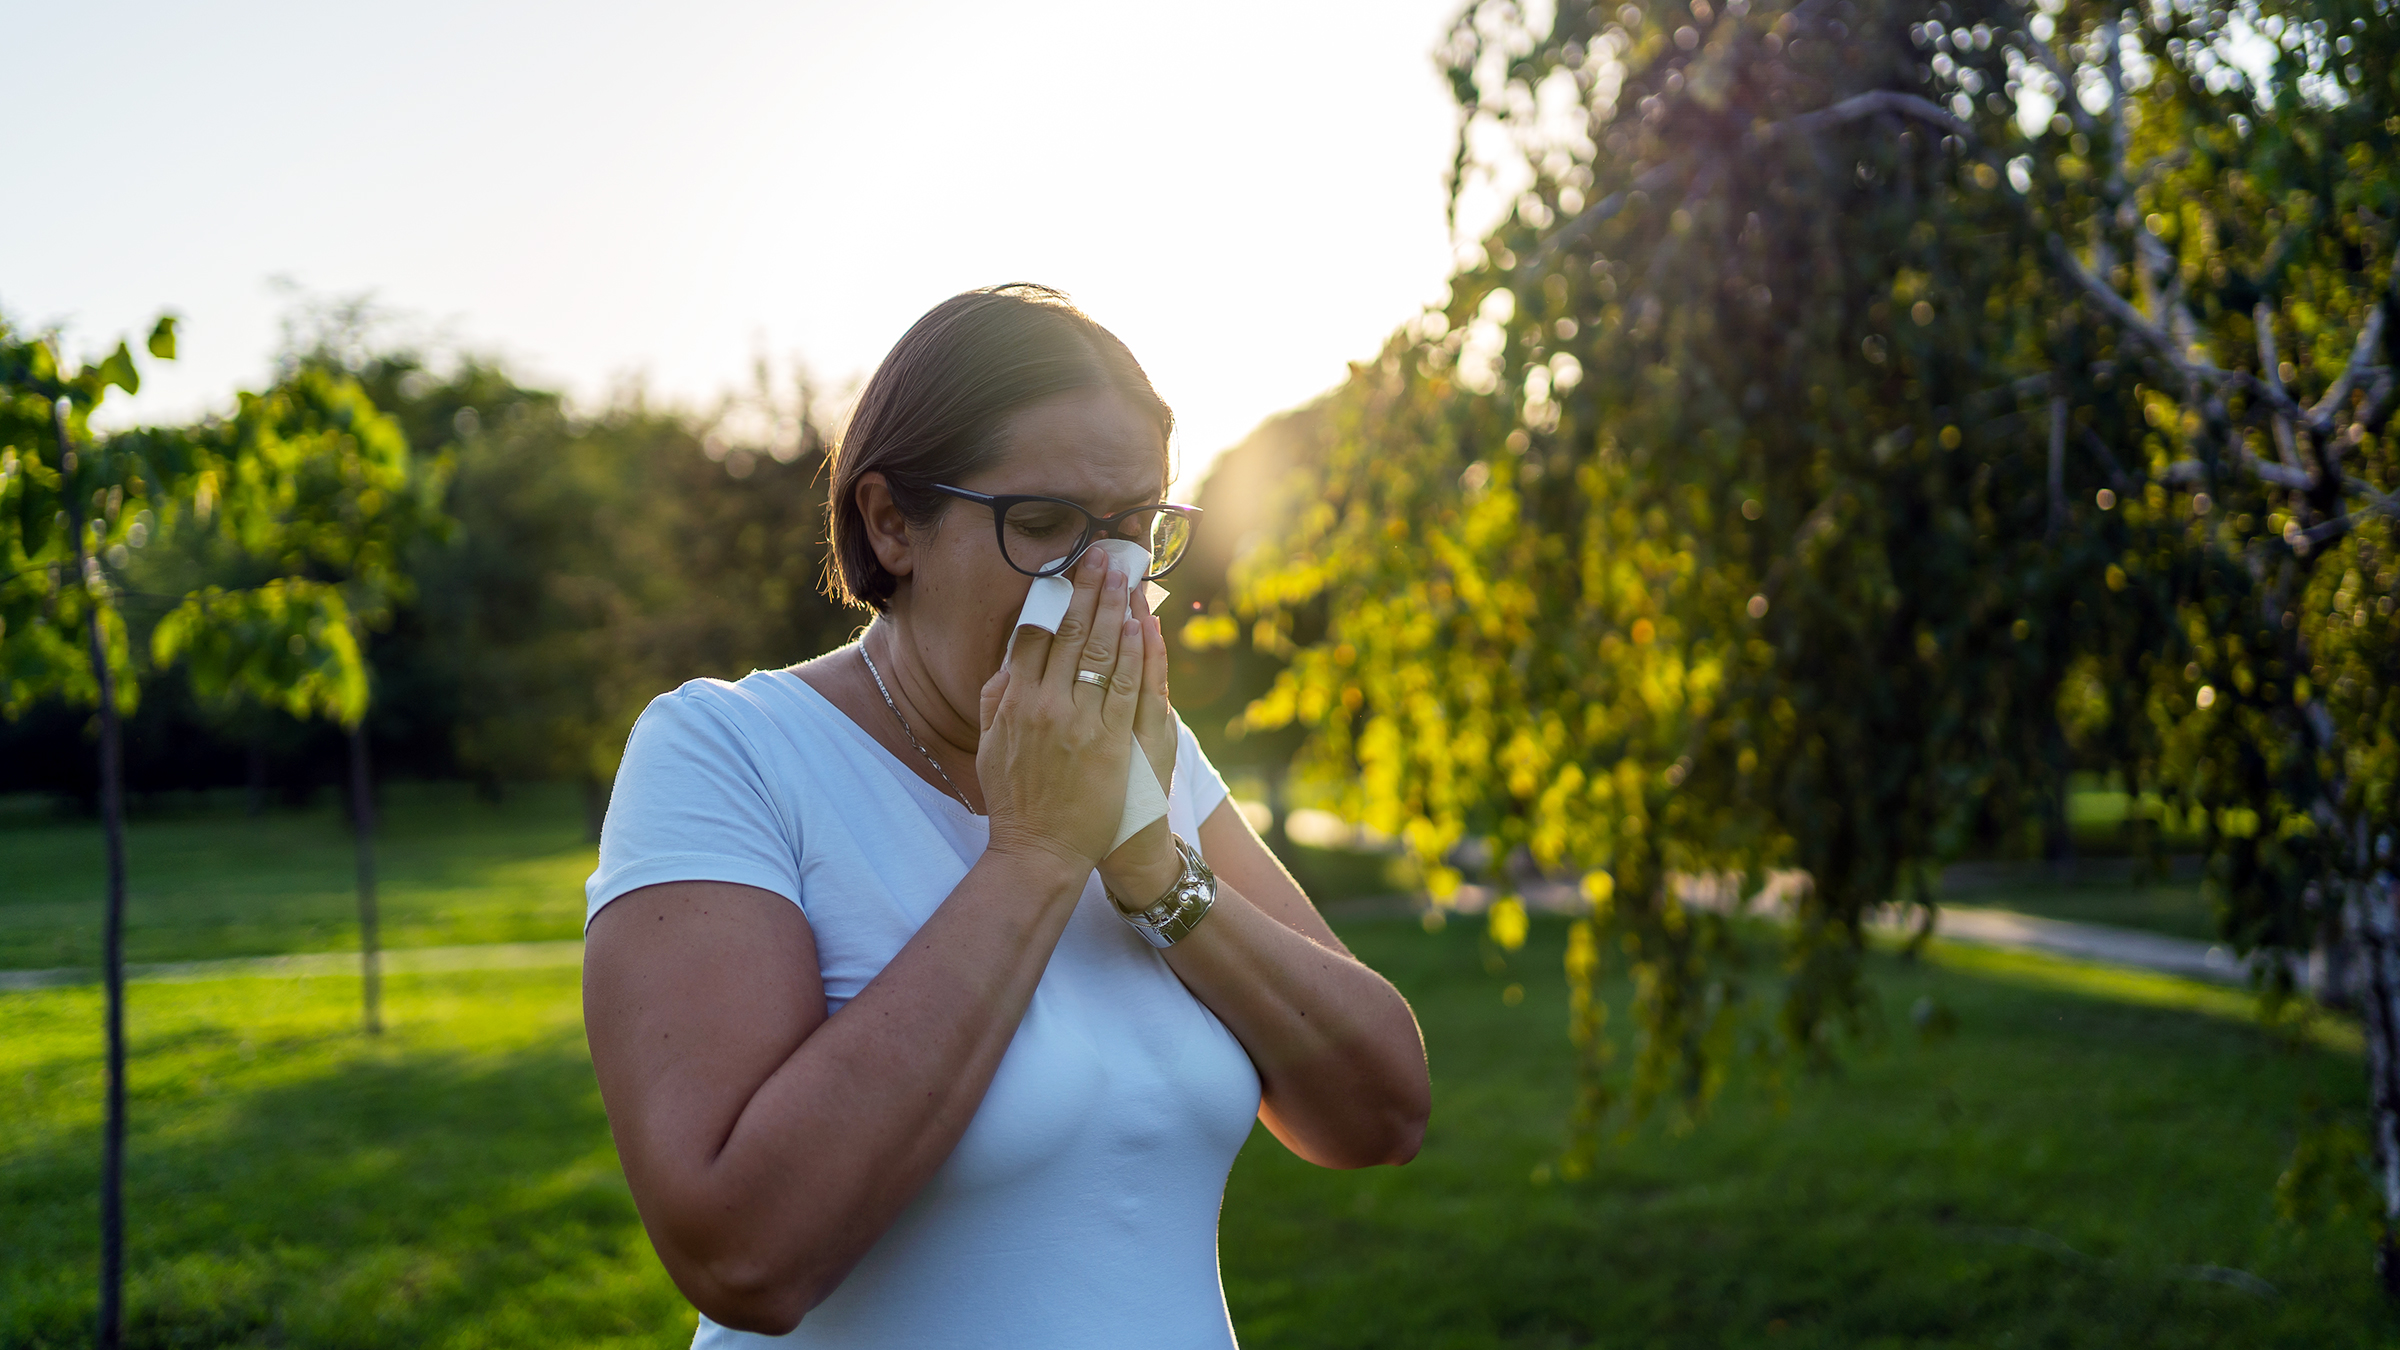 A woman with allergy symptoms blows her nose outside.
Nenad Cavoski/iStock via Getty Images Plus 